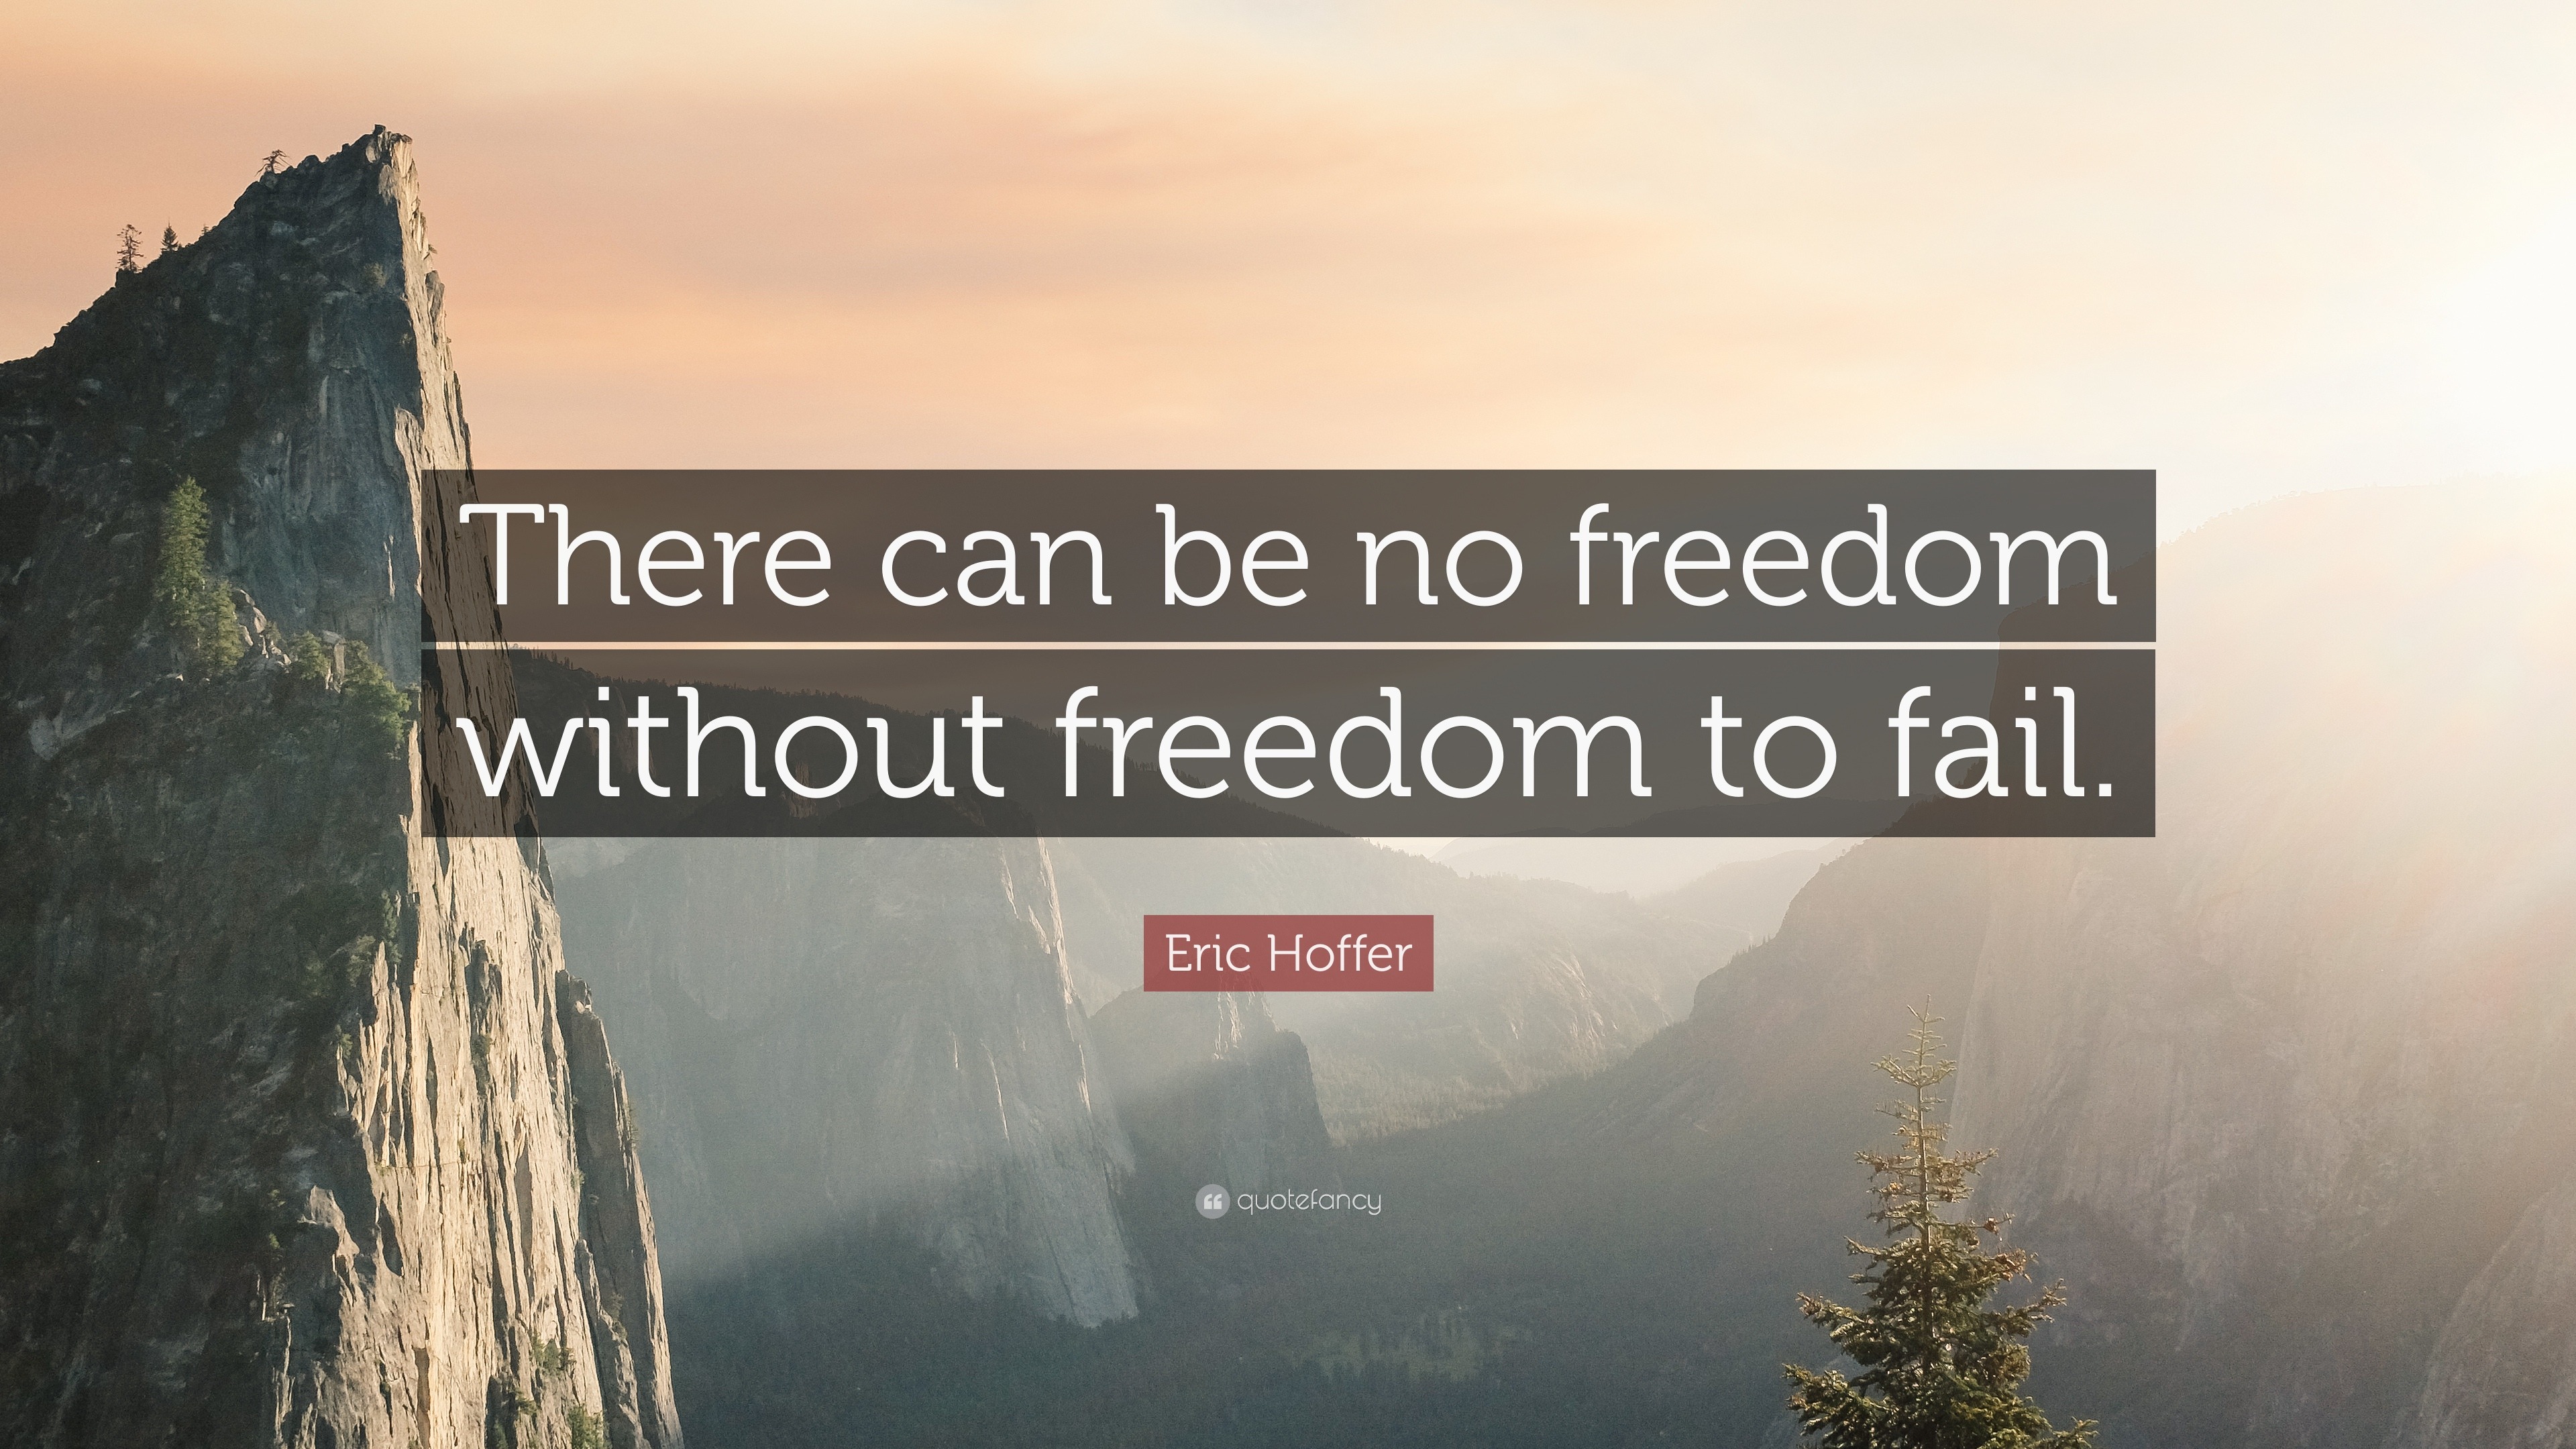 Eric Hoffer Quote: “There can be no freedom without freedom to fail.”